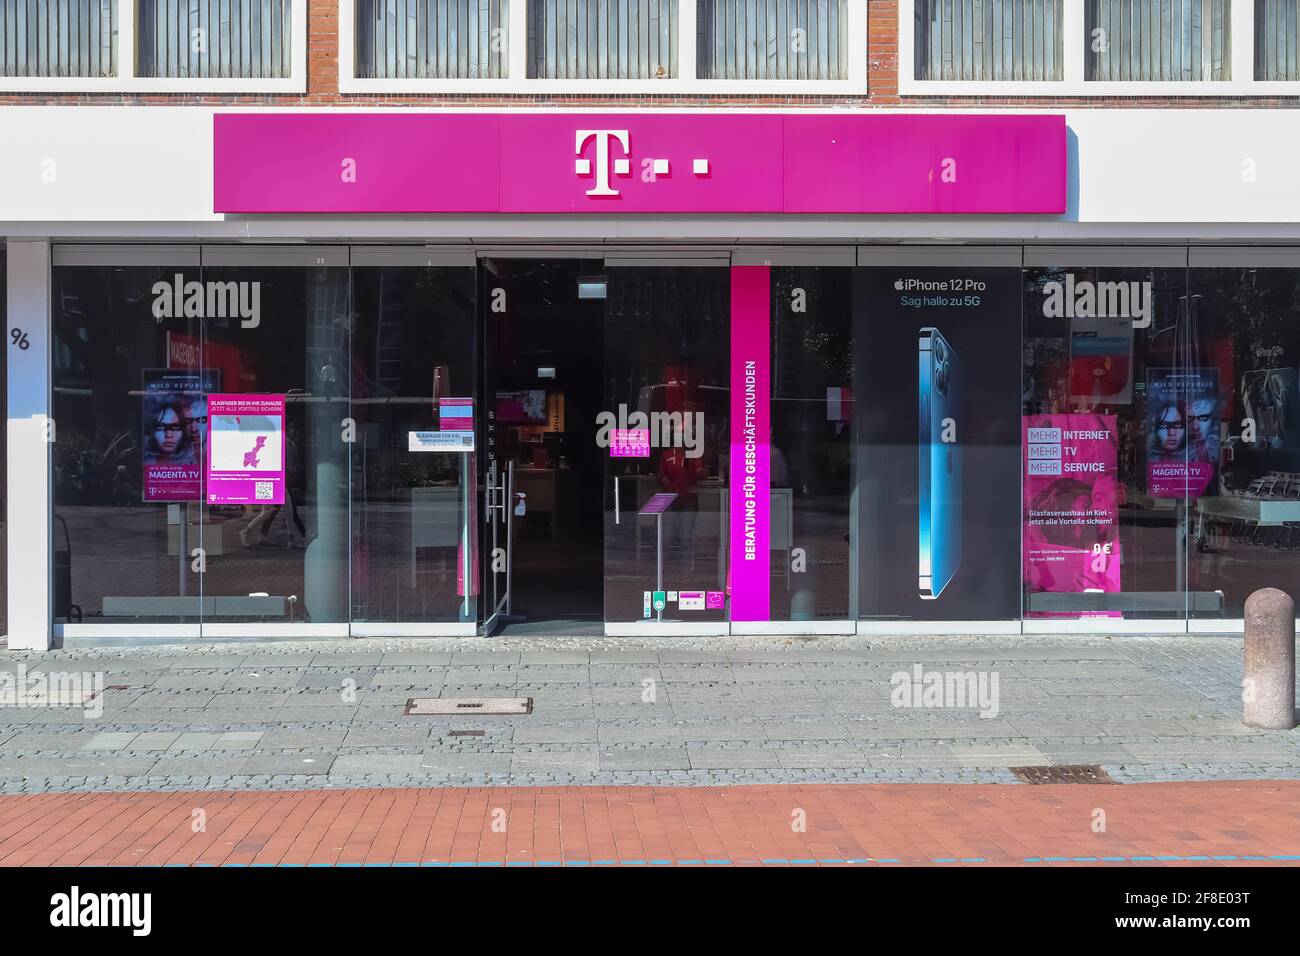 Entrance of a Telekom Store in the city of Kiel in Germany Stock Photo